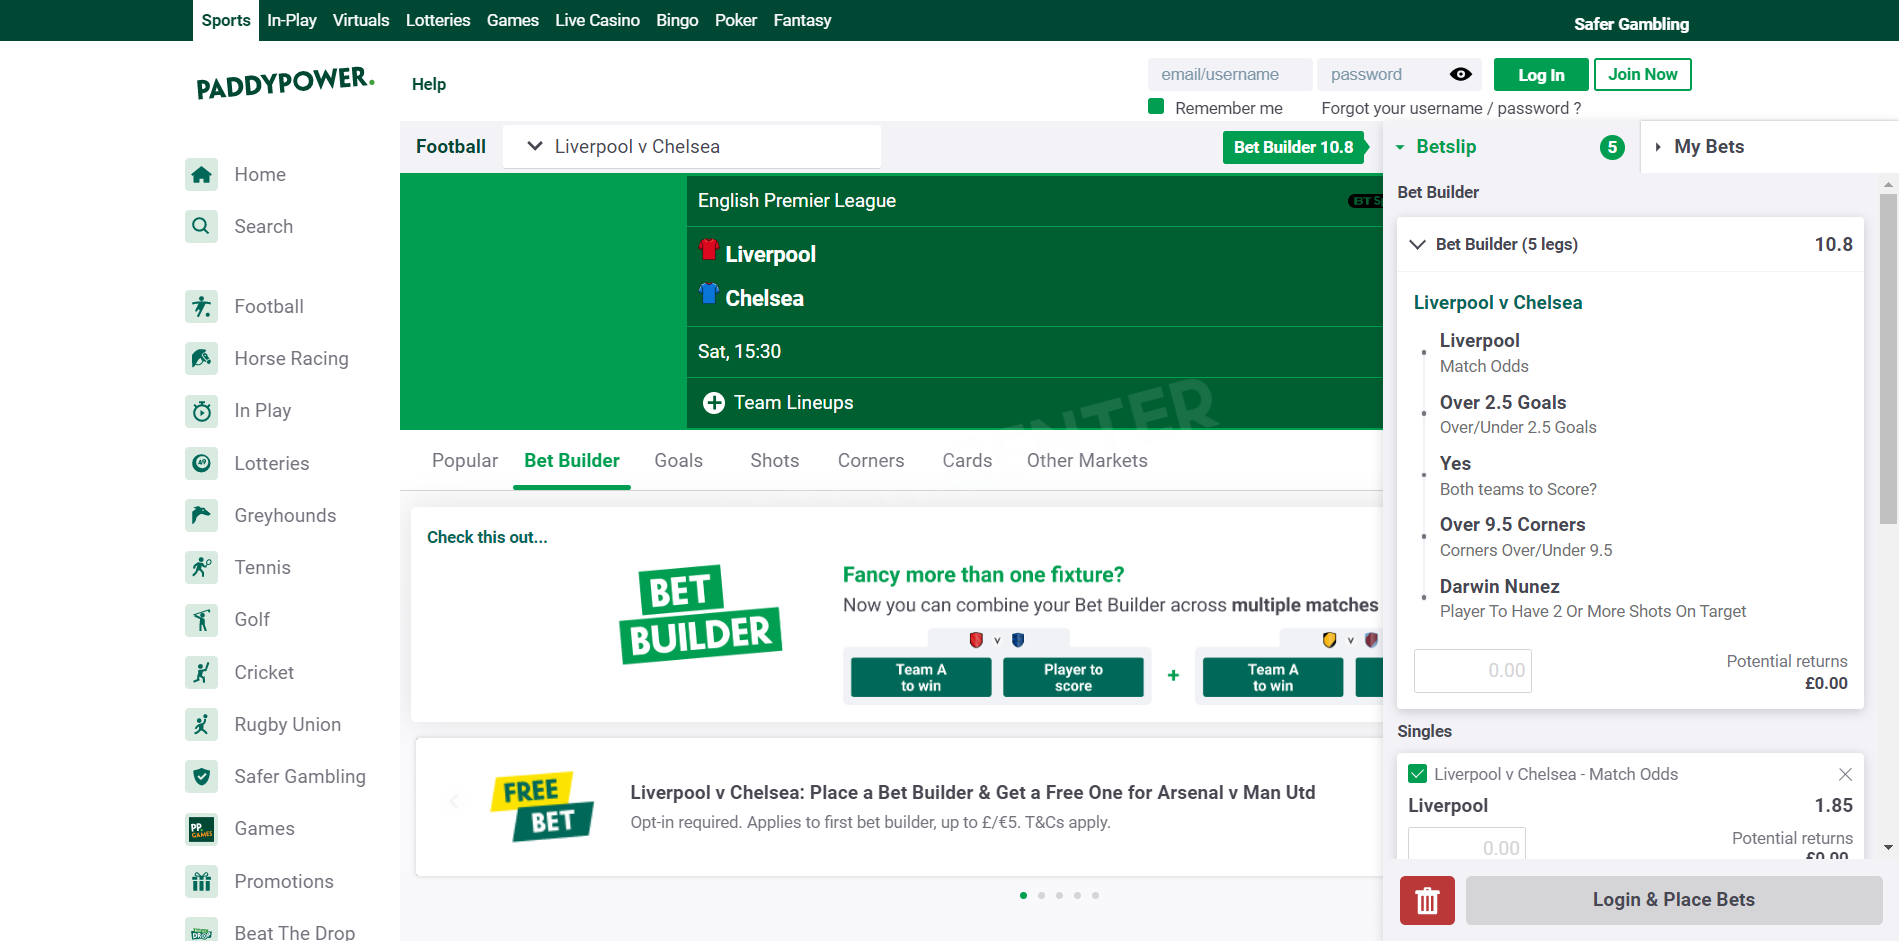 Bet Builder for Liverpool vs Chelsea in Paddy Power